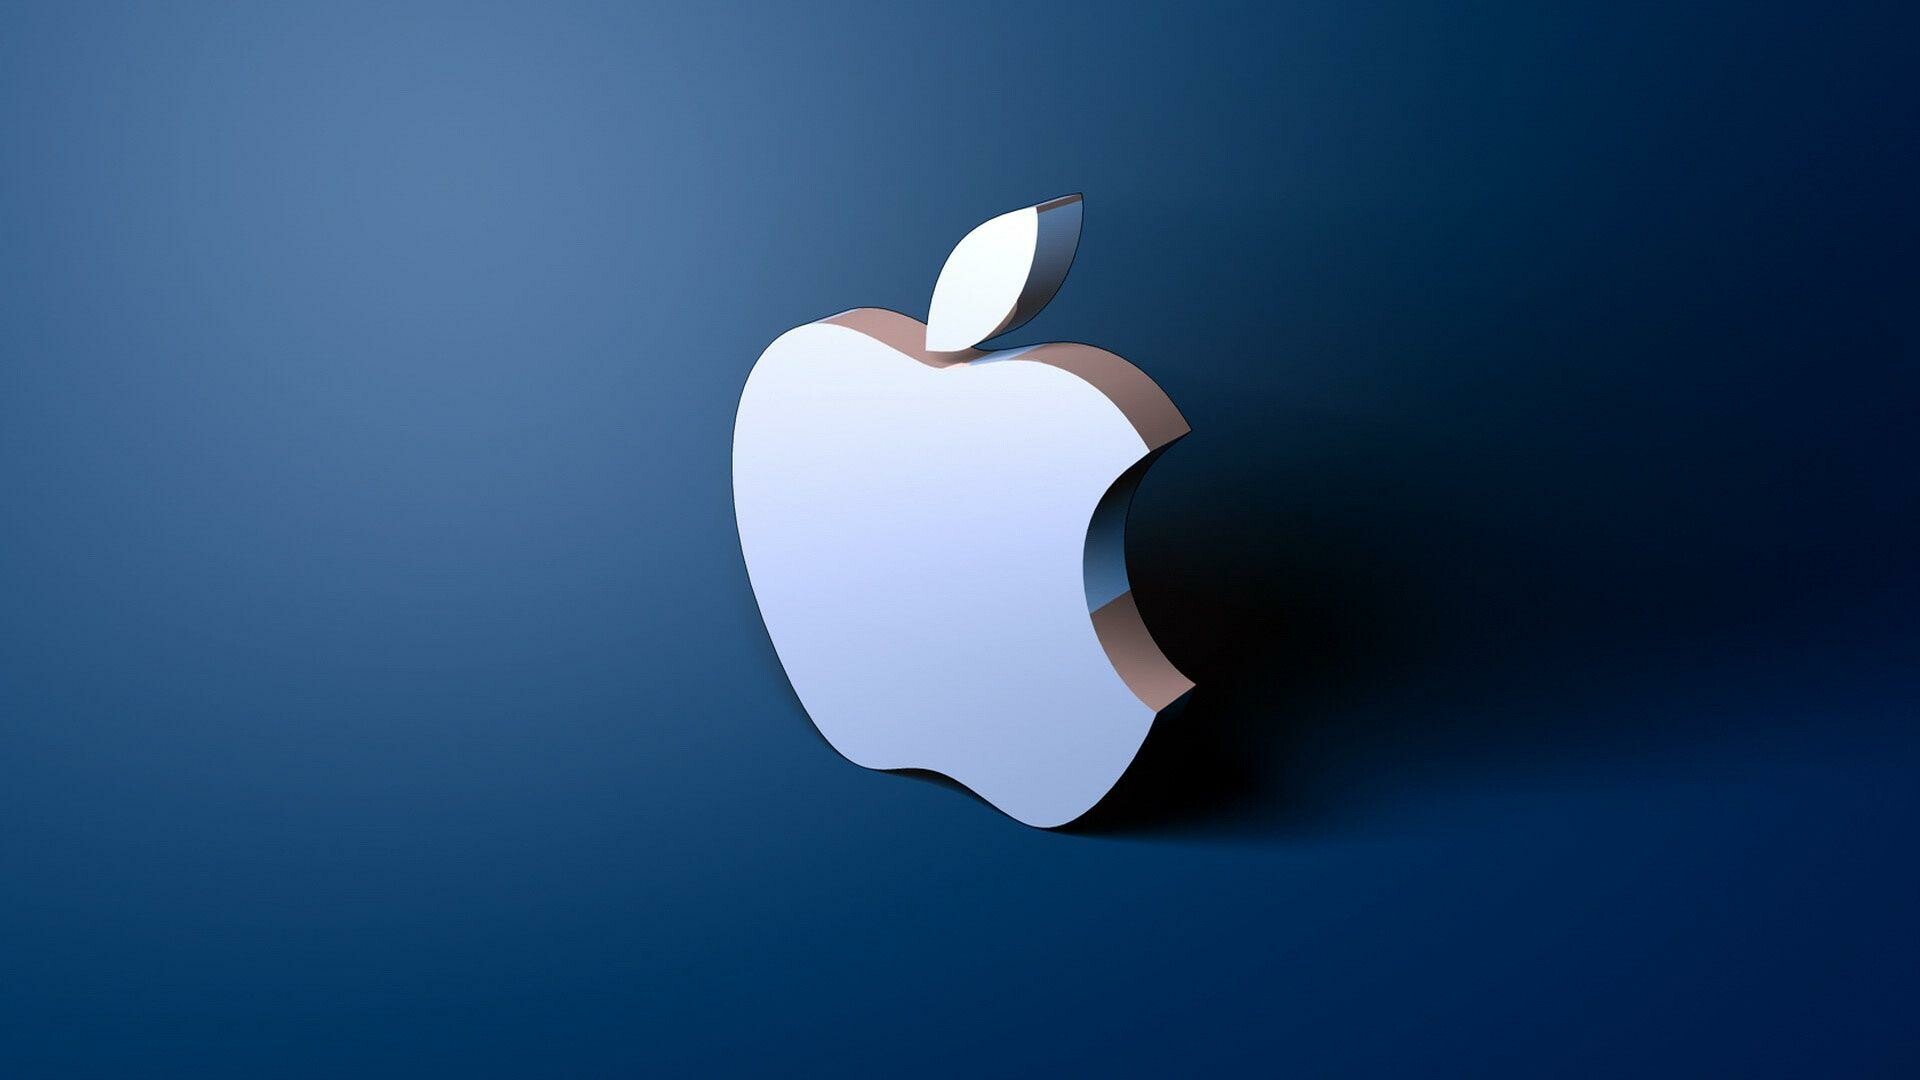 Apple Logo: iPad, A tablet or slate computer system with a touchscreen, Symbol. 1920x1080 Full HD Wallpaper.